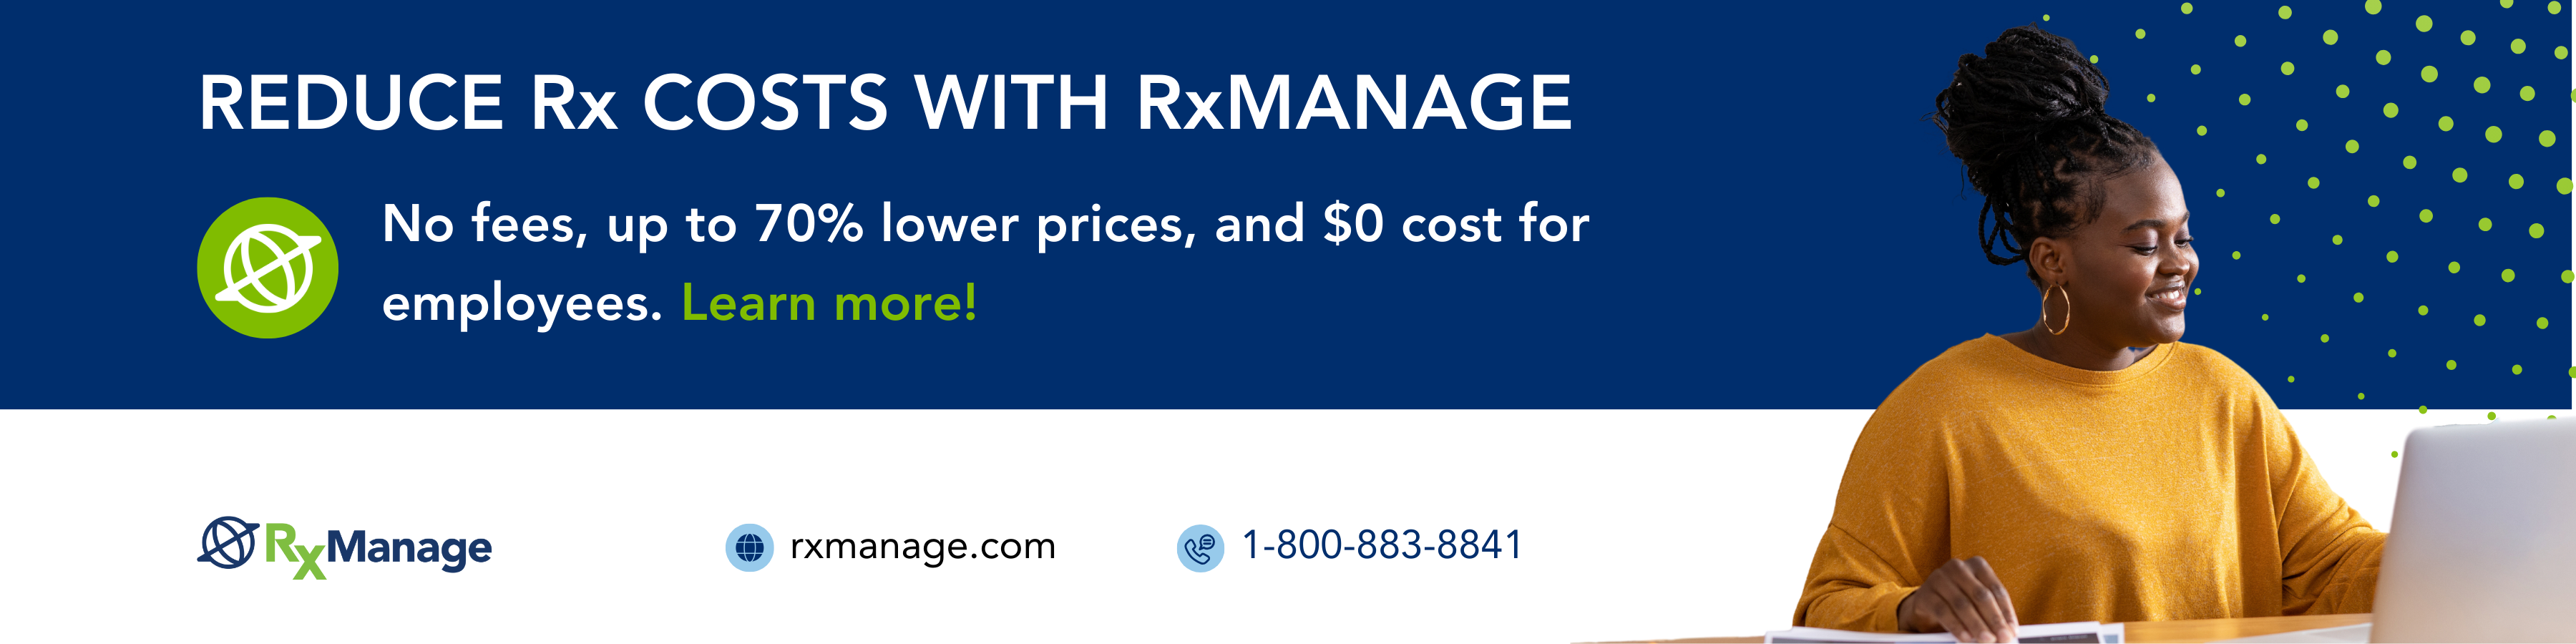 RxManage Reduce Costs Ad 